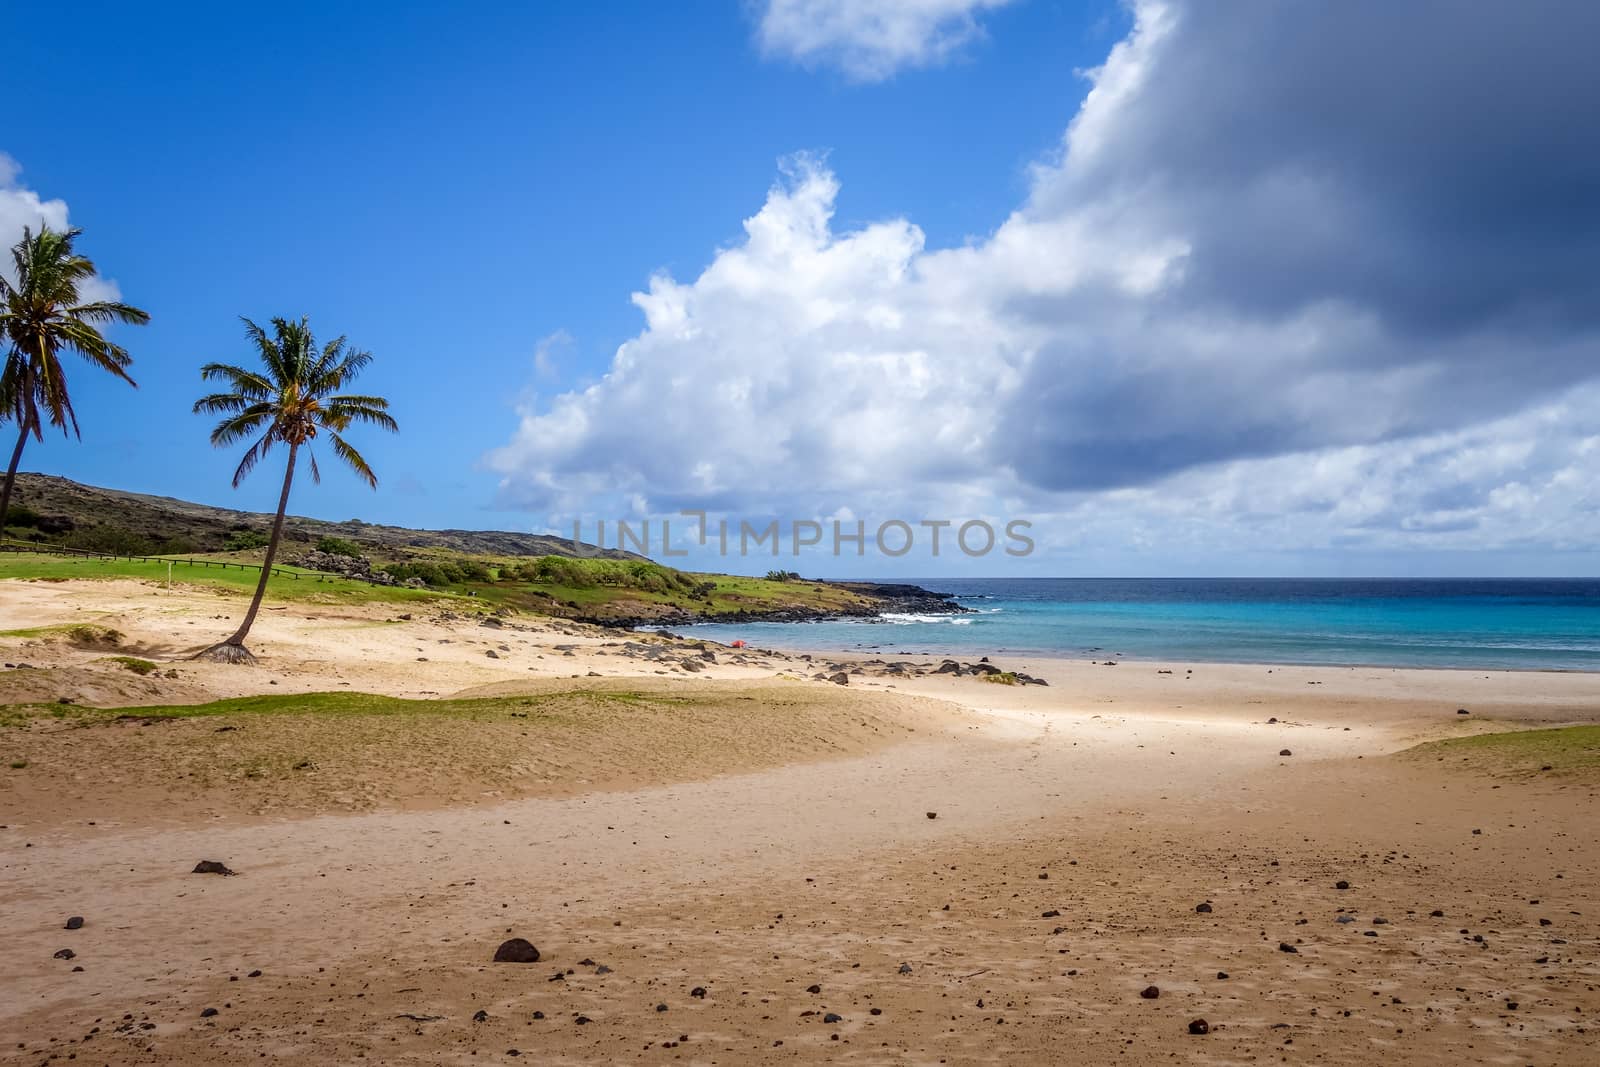 Palm trees on Anakena beach, easter island by daboost